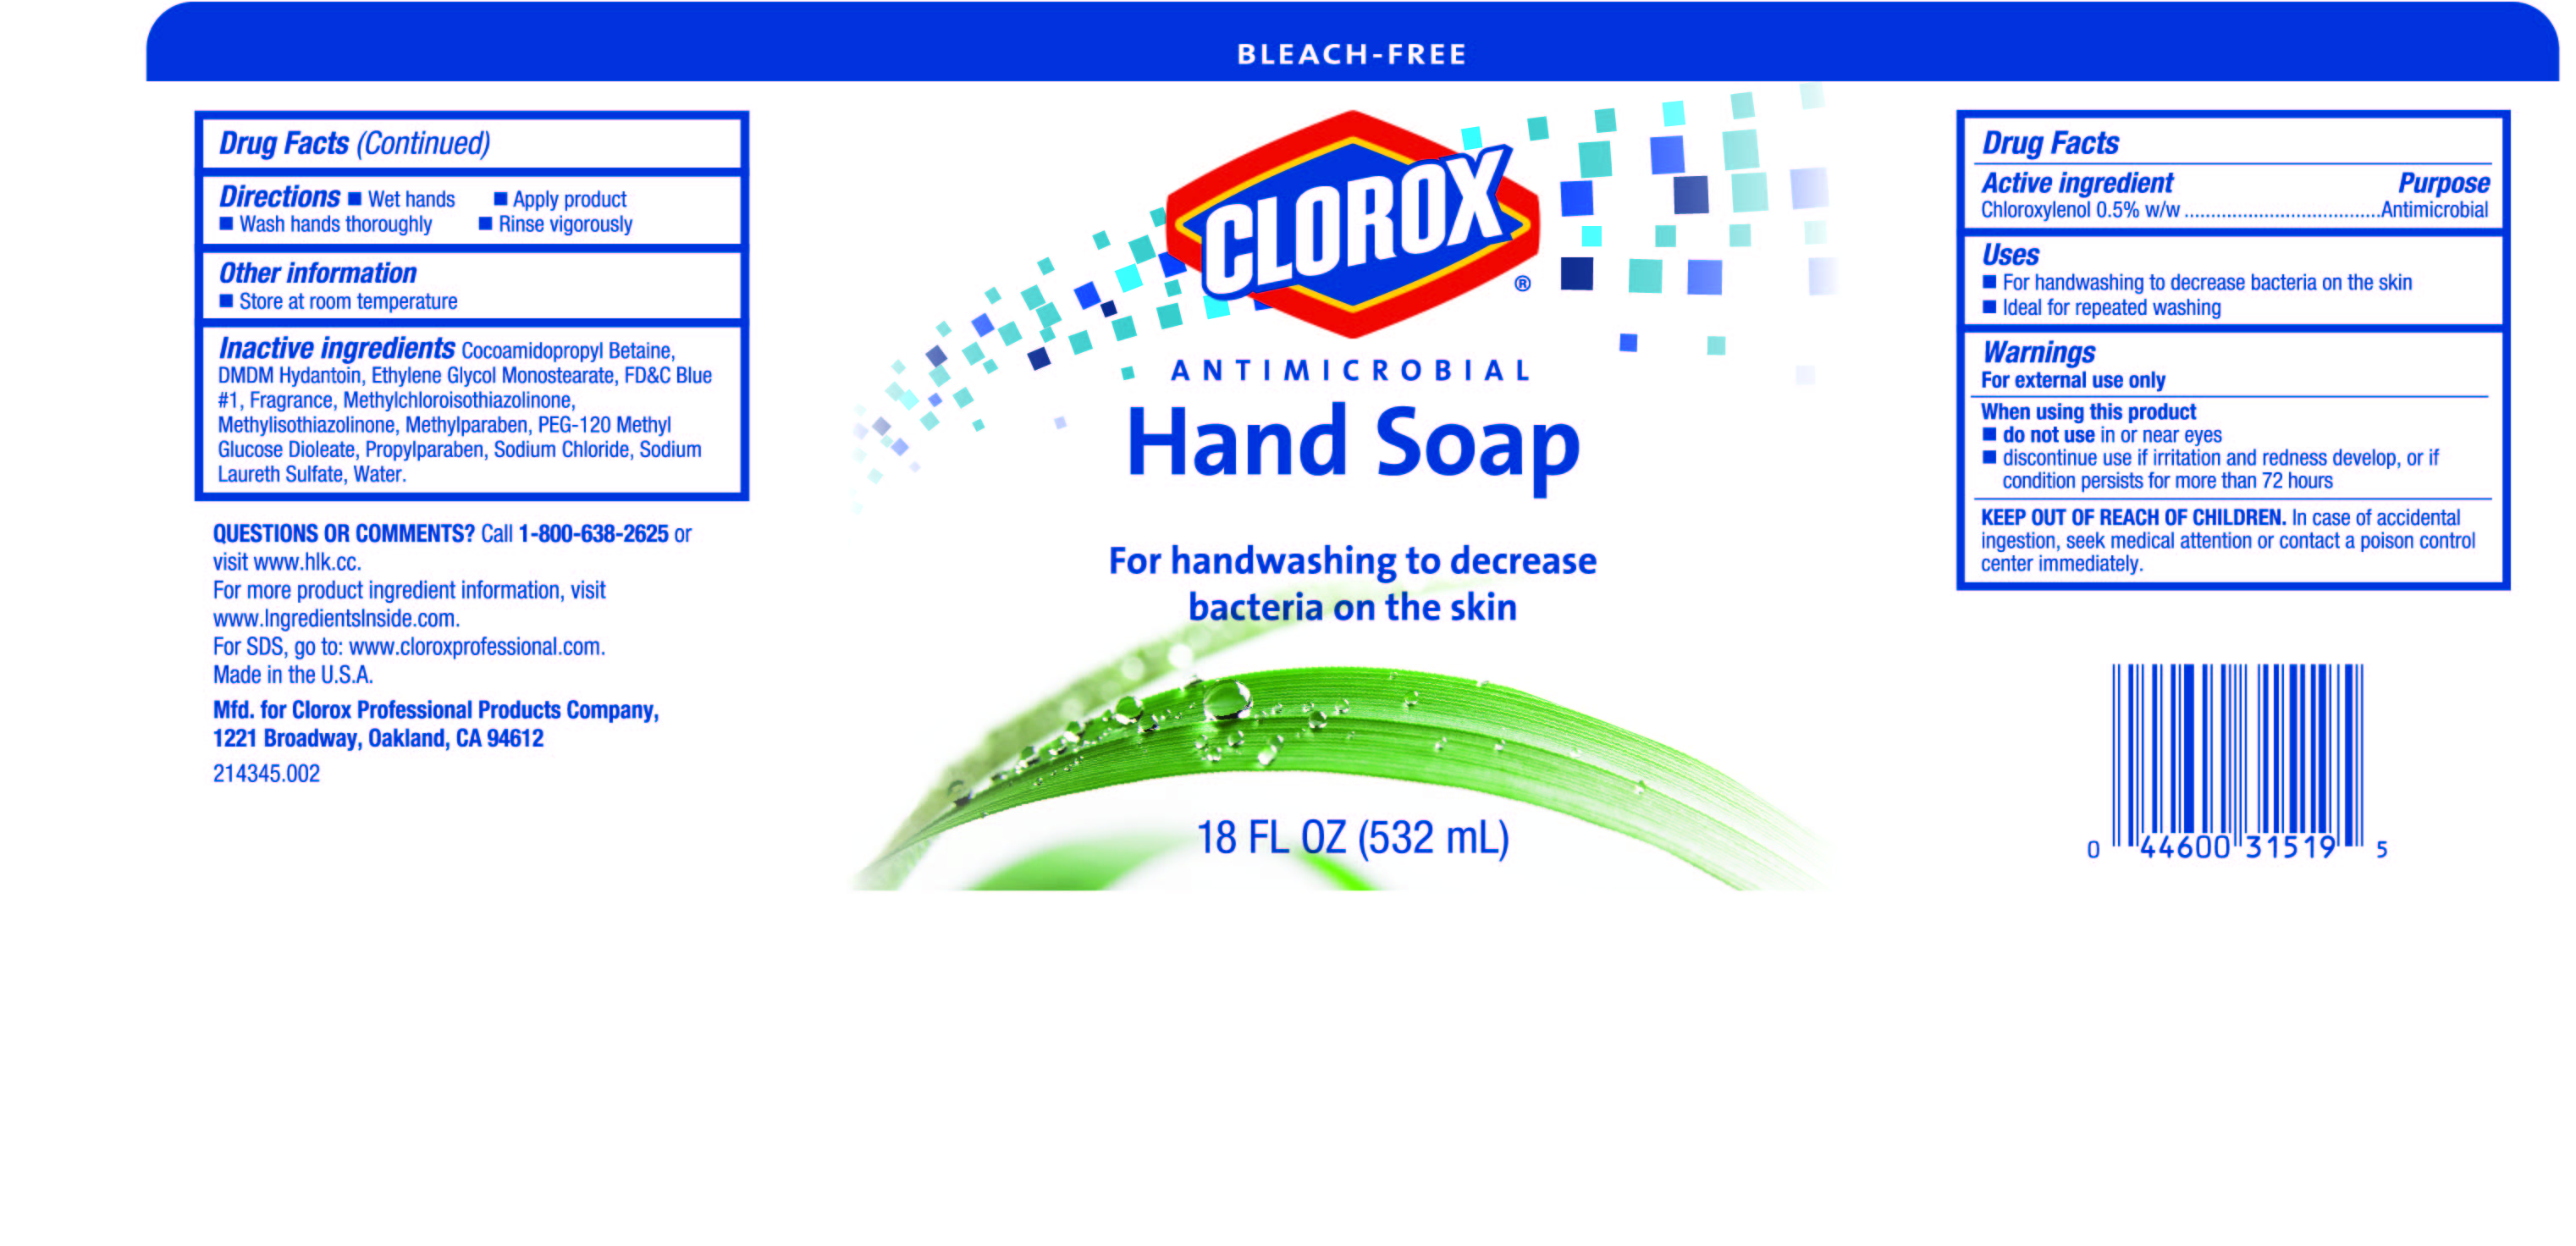 Clx Antimicrobial Hand Soap